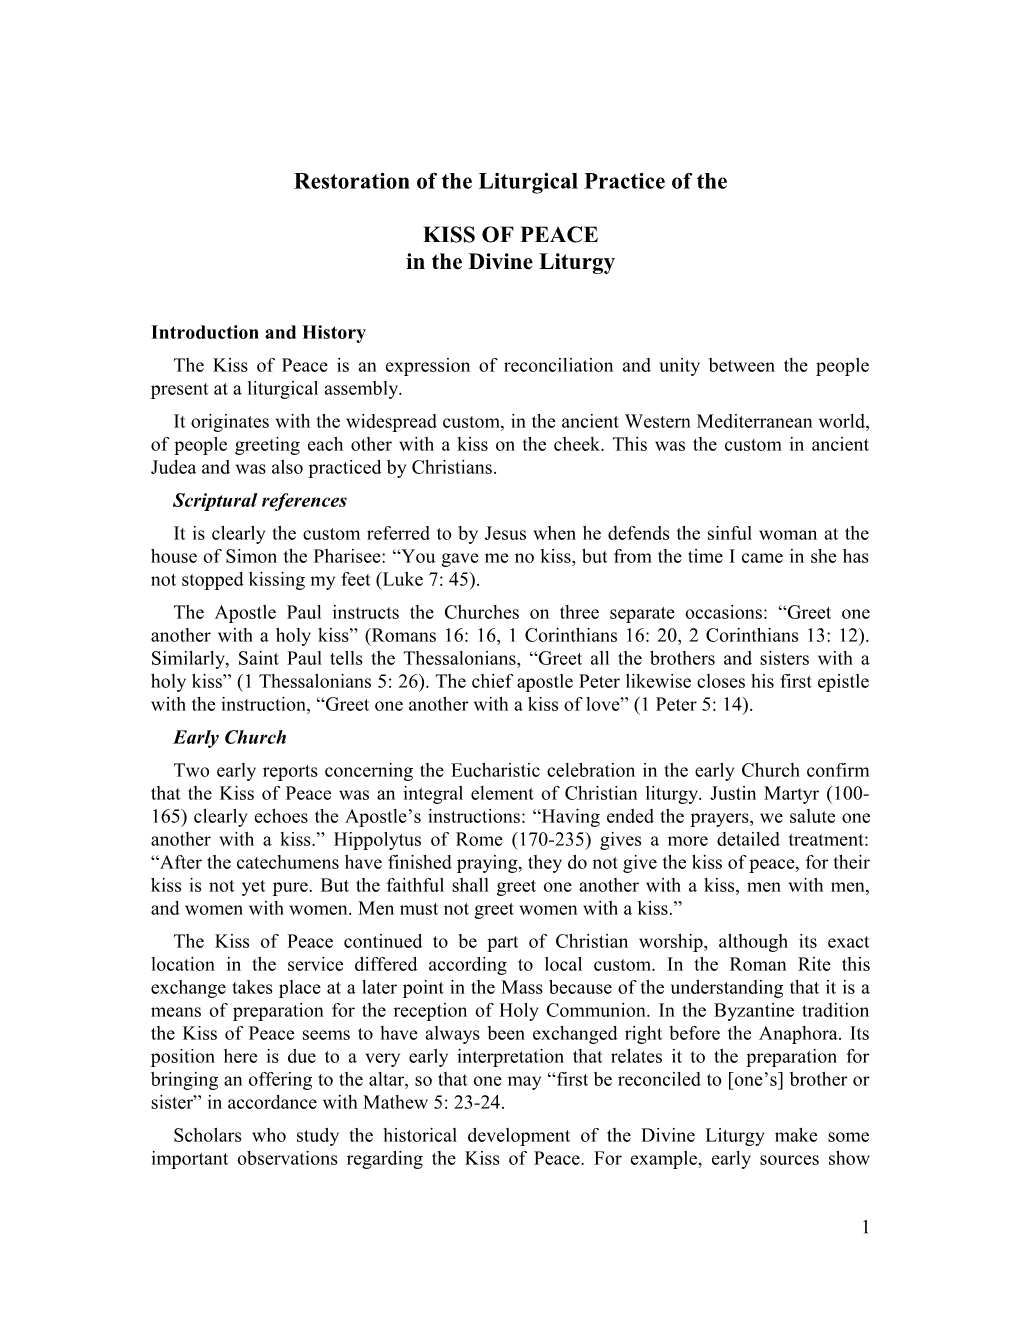 Restoration of the Liturgical Practice of The